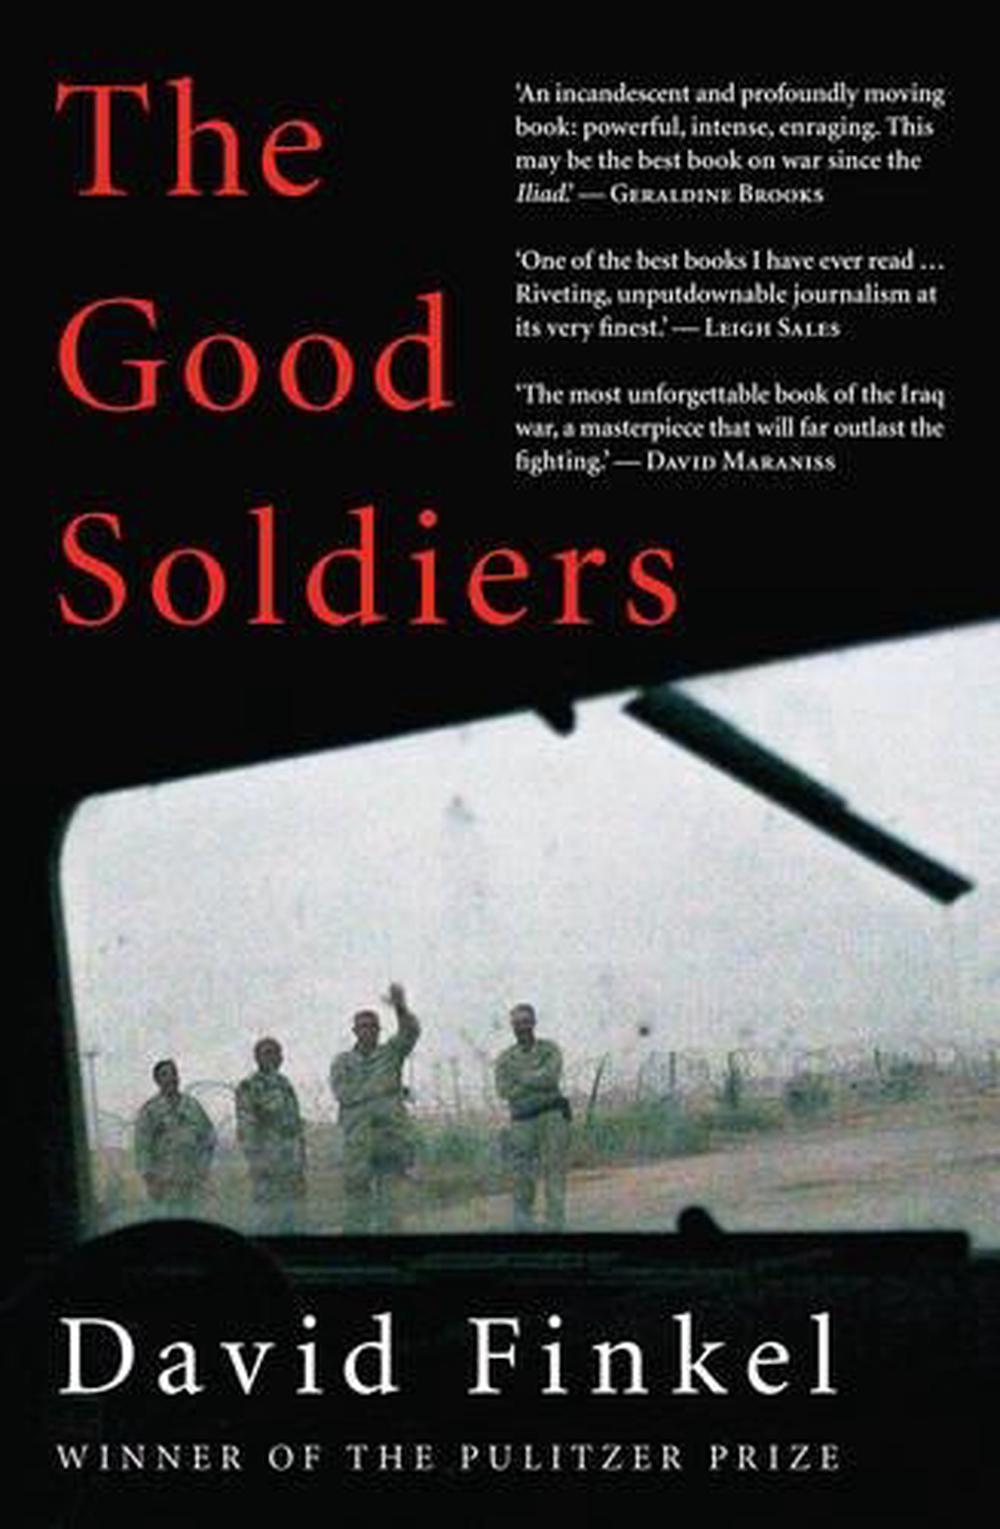 The Good Soldiers by David Finkel